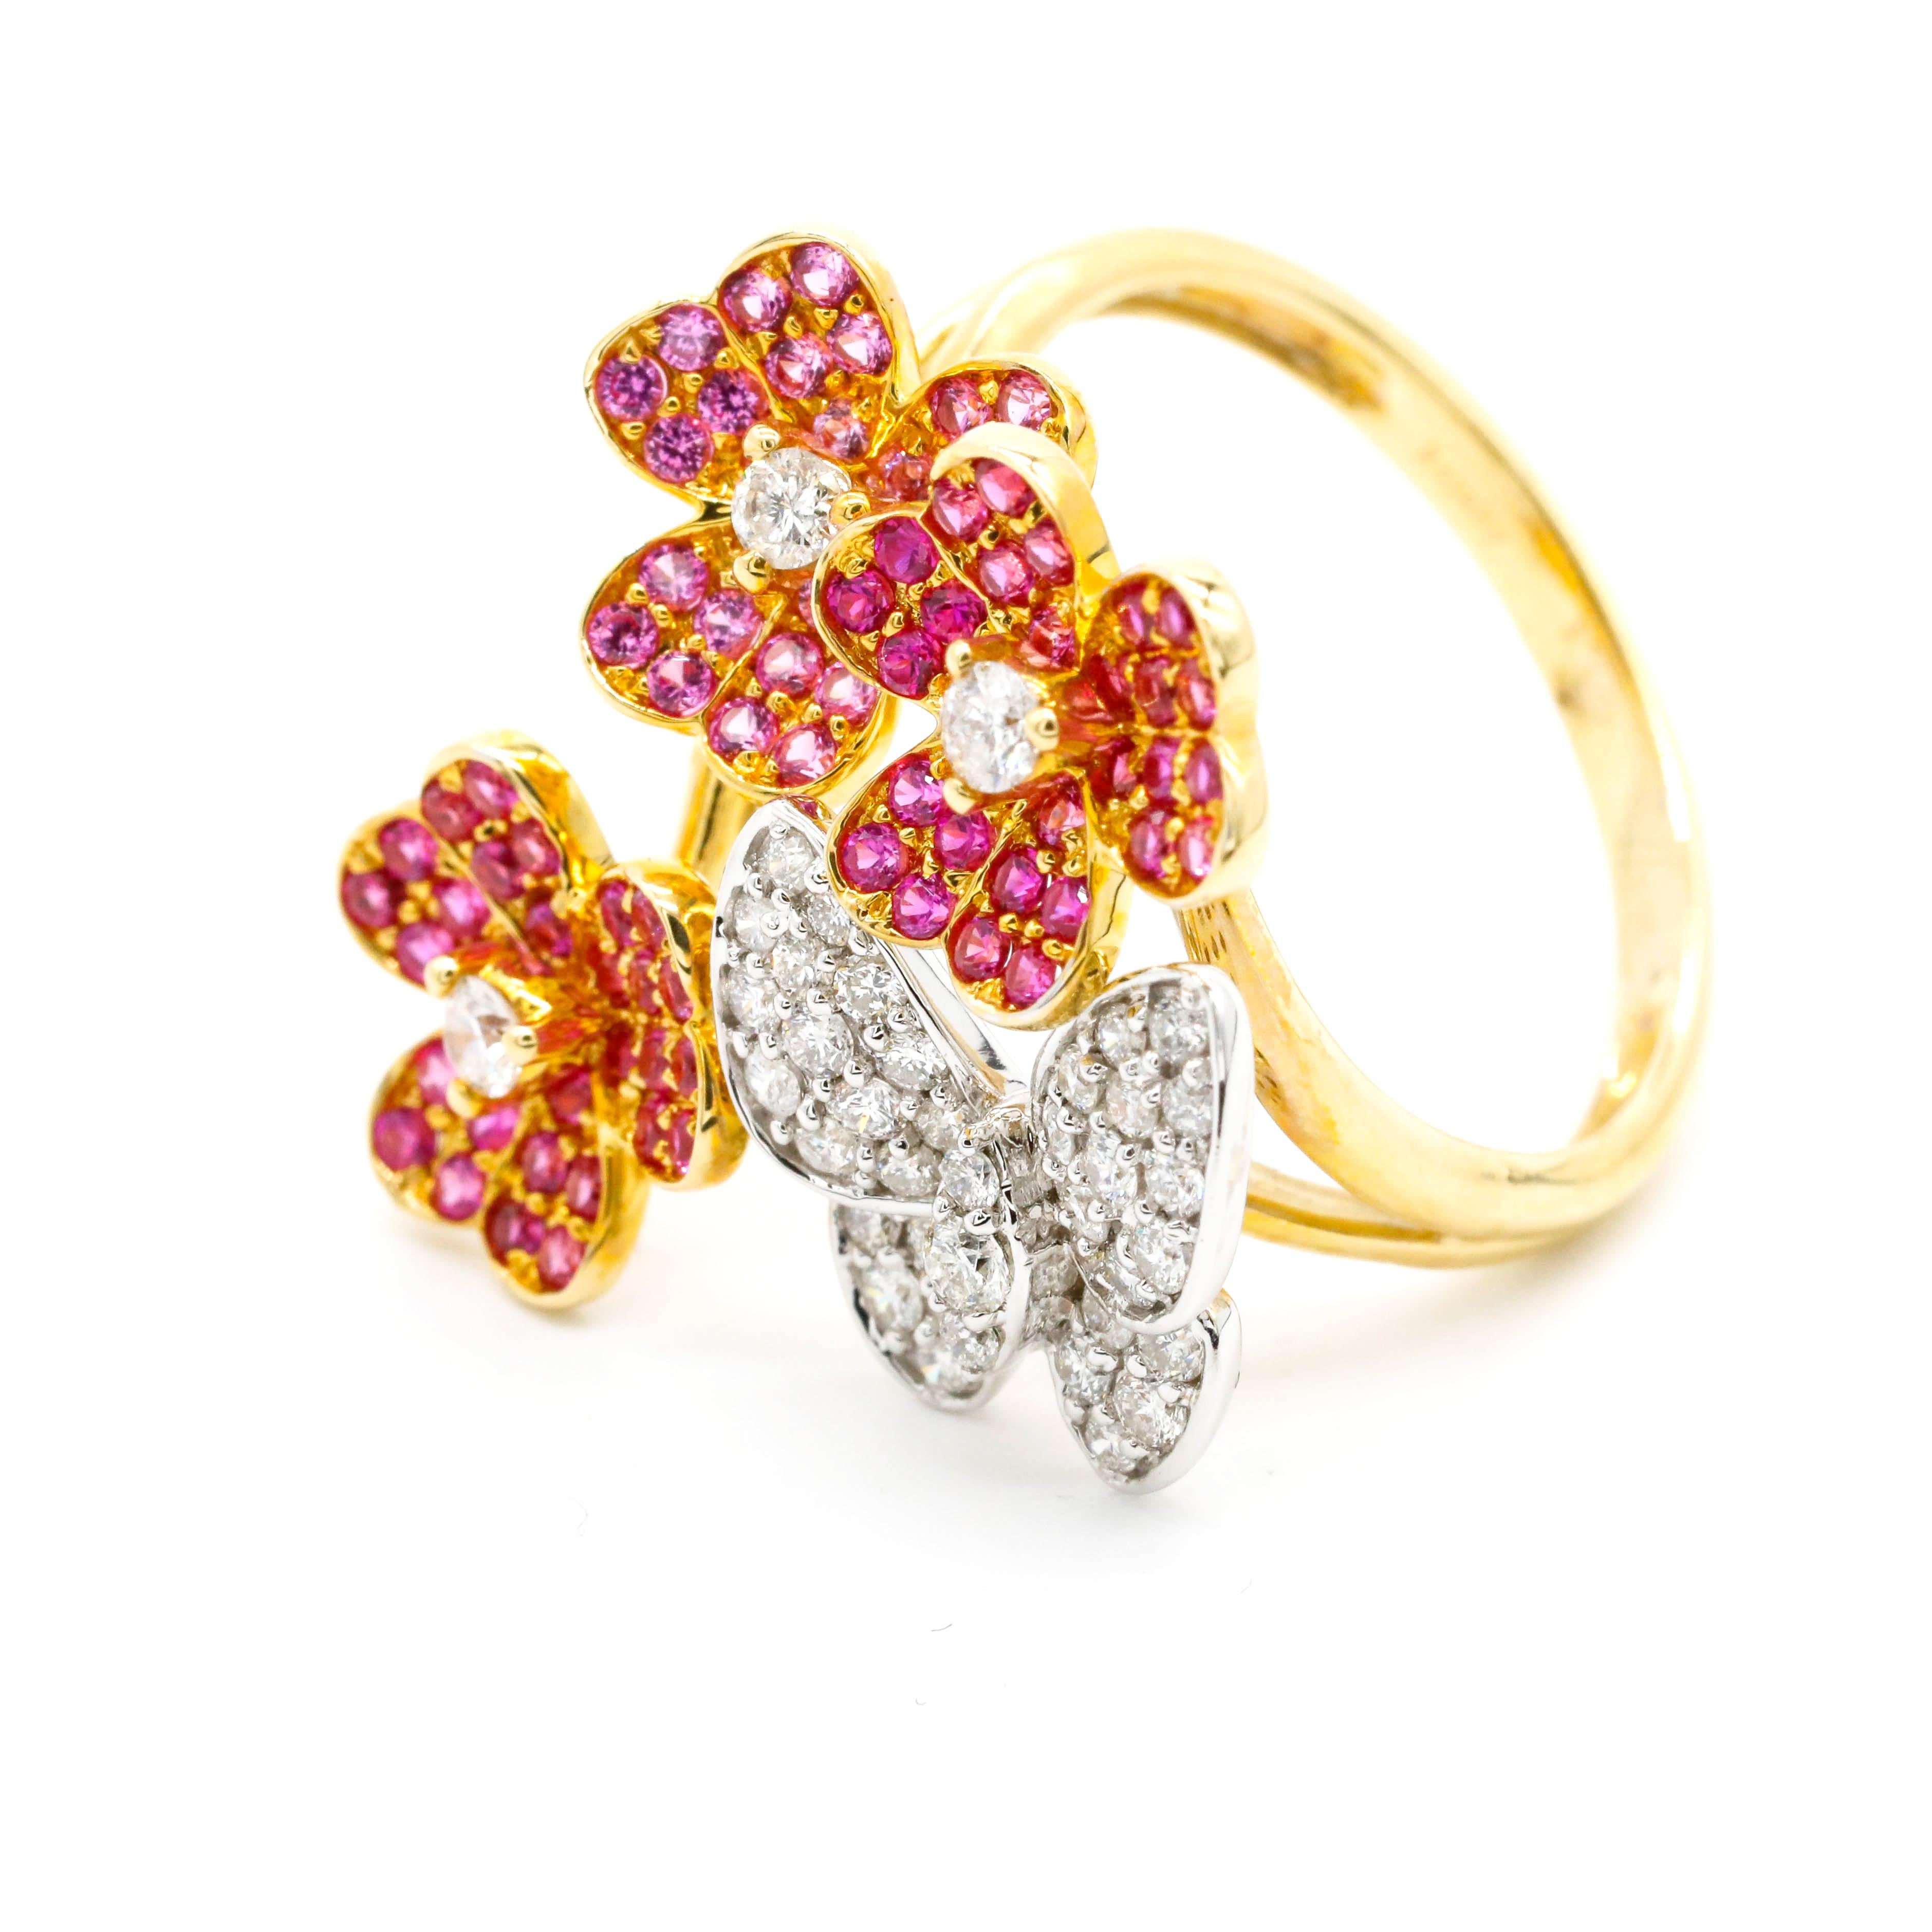 1.09 Ct Pink Sapphire 0.63 Carat Diamond 14k Yellow Gold Flower Butterfly Ring

This modern ring features a total of 0.63 carats of diamond round shape Pink Sapphire Gemstone Set in 14K Yellow Gold.

We guarantee all products sold and our number one